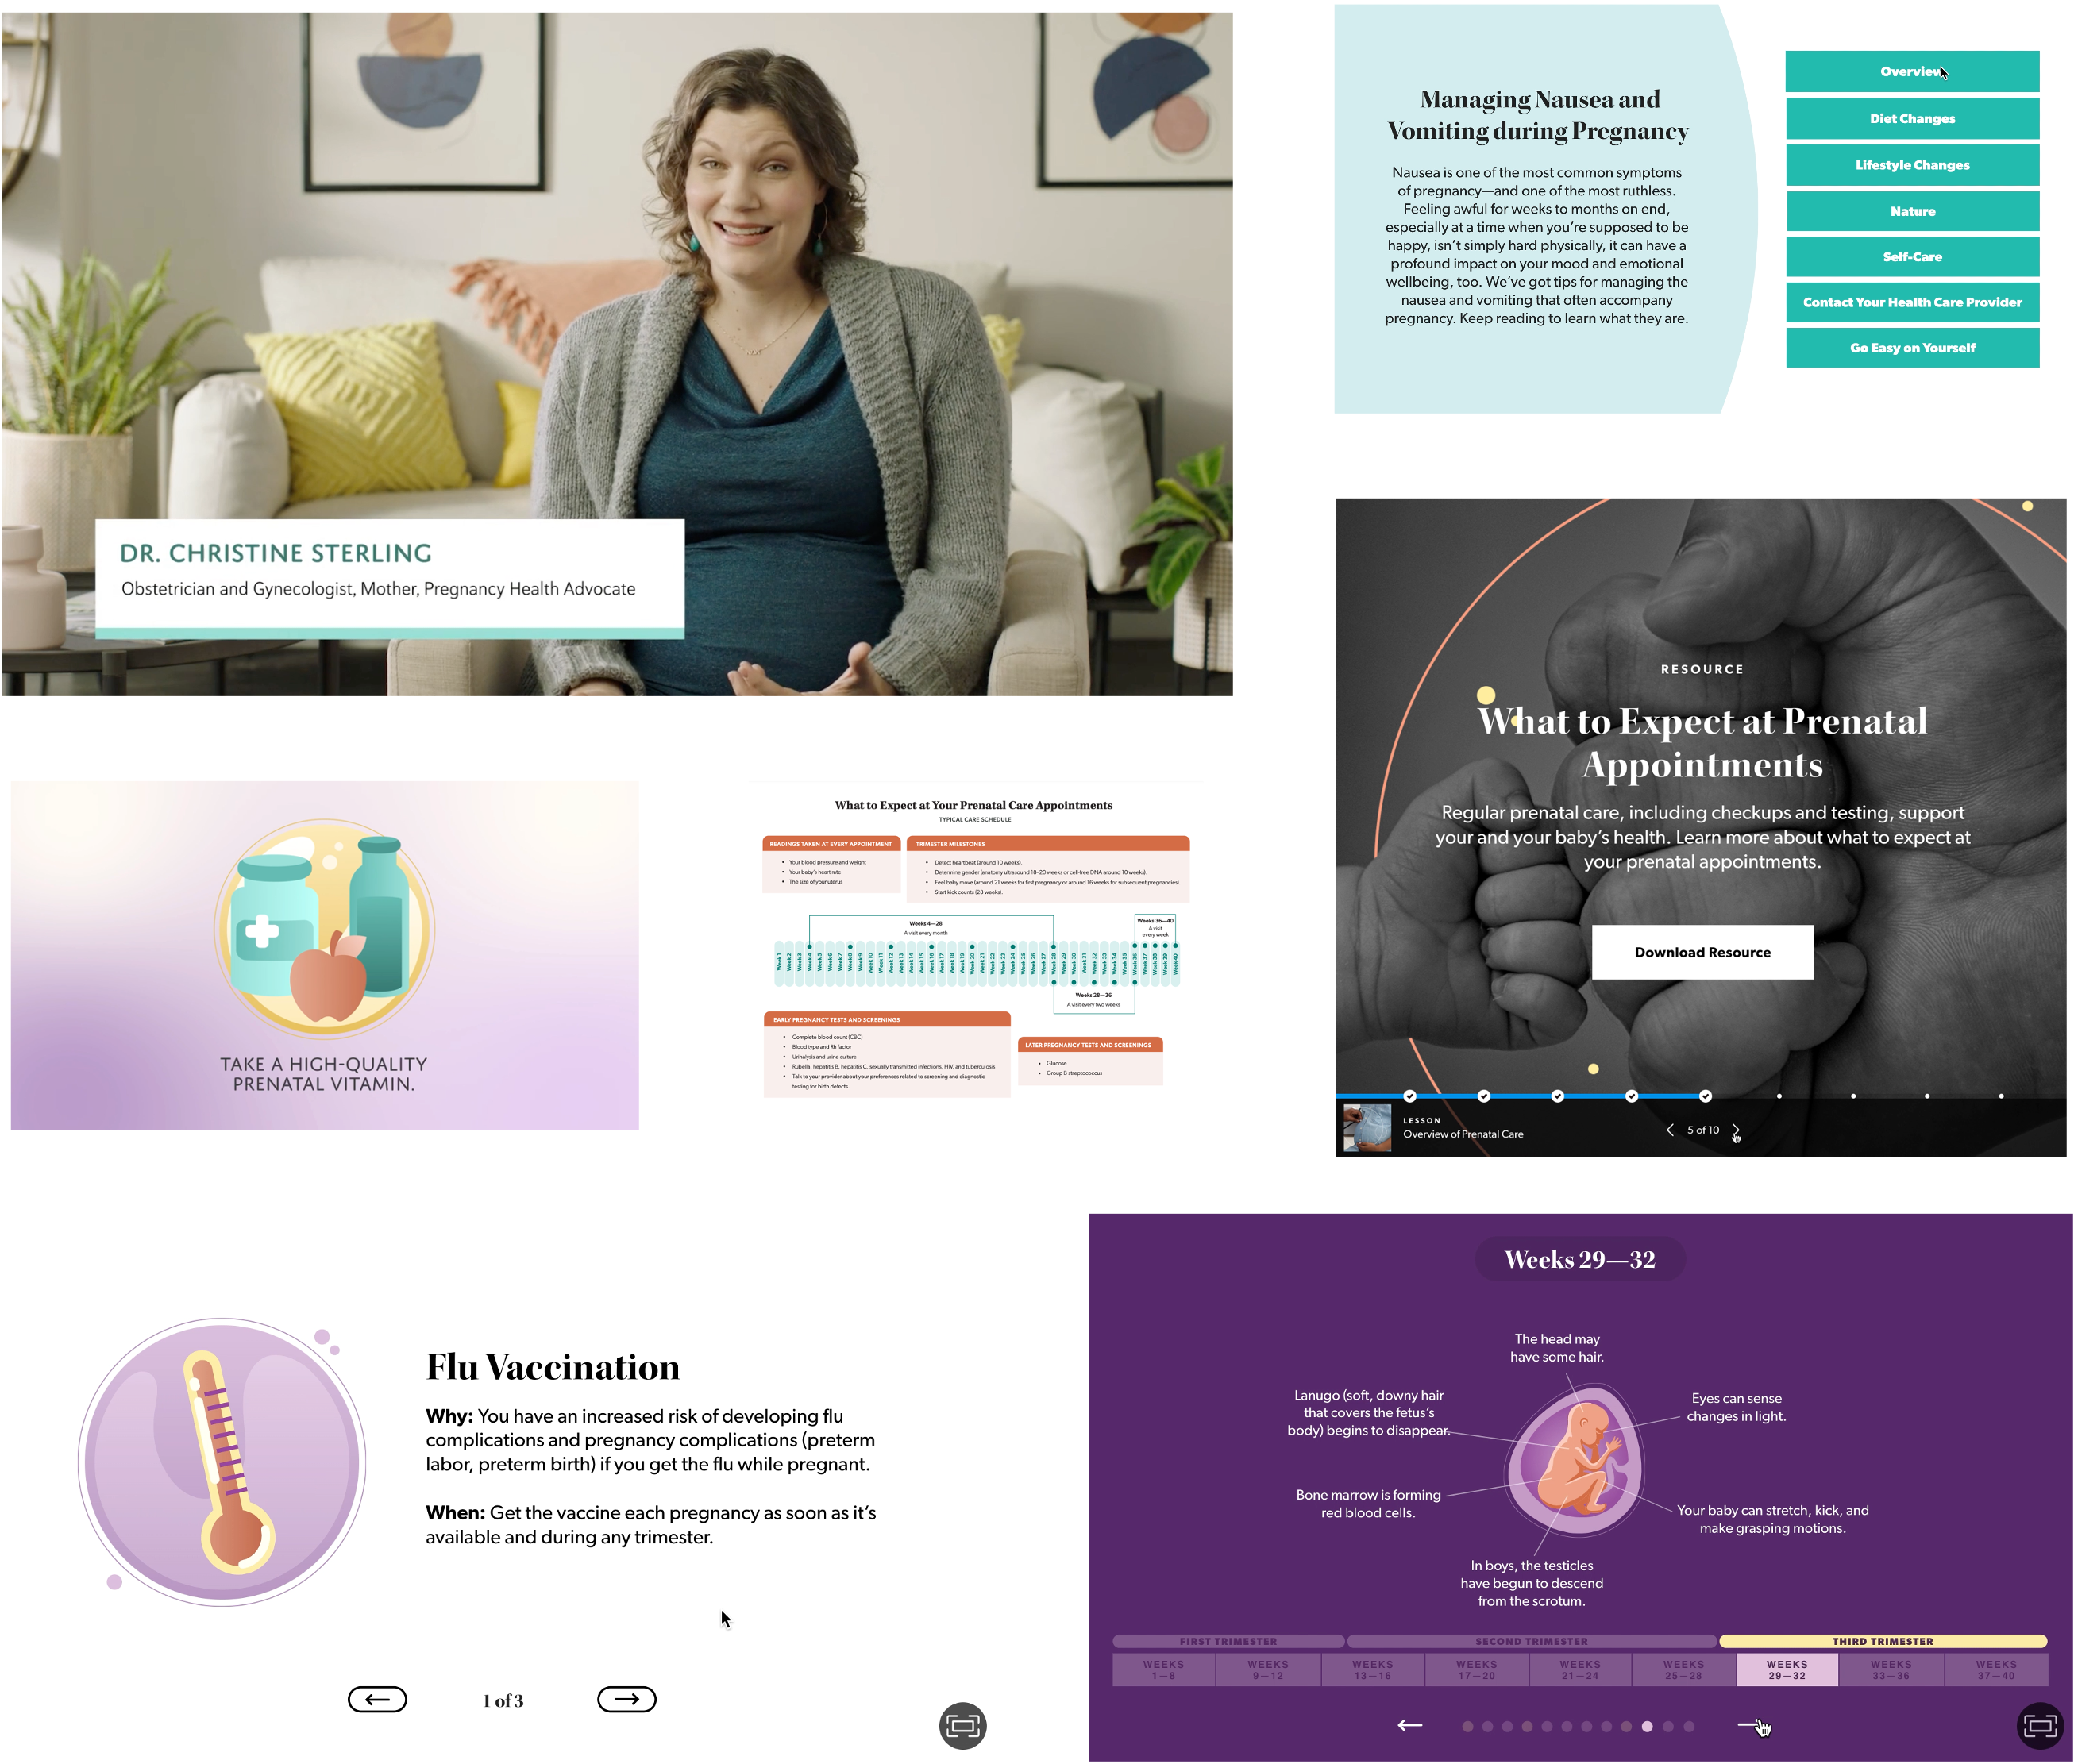 Overview of mPulse’s prenatal and postpartum solution